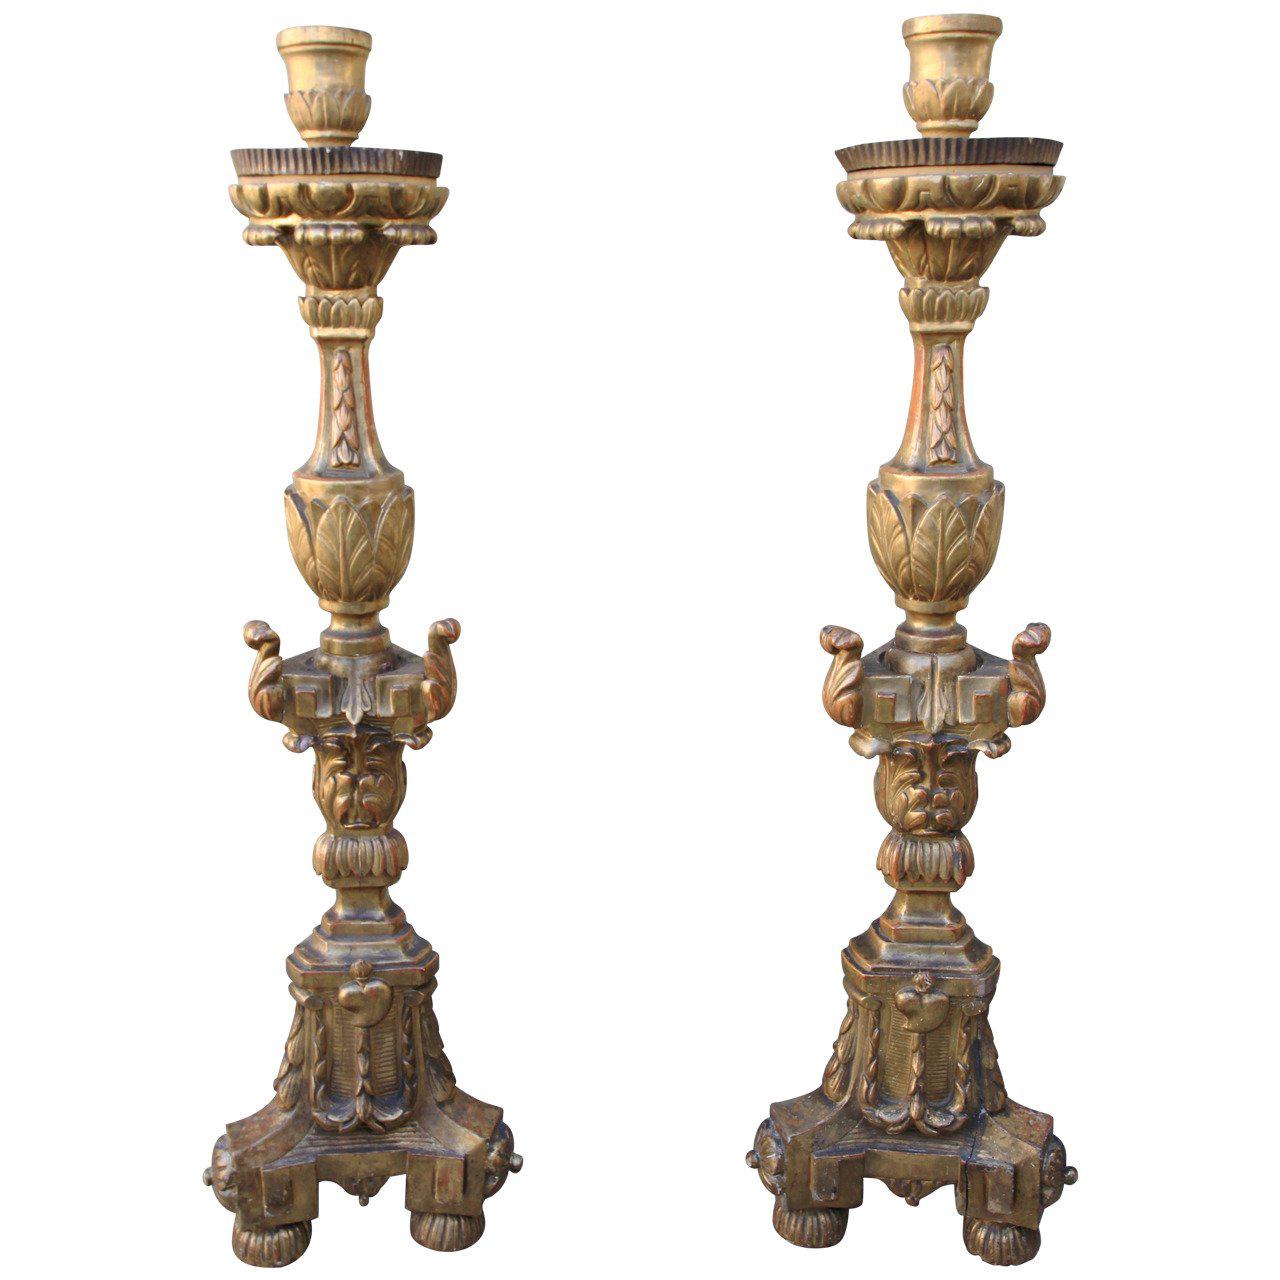 Pair of 18th Century Giltwood Torcheres